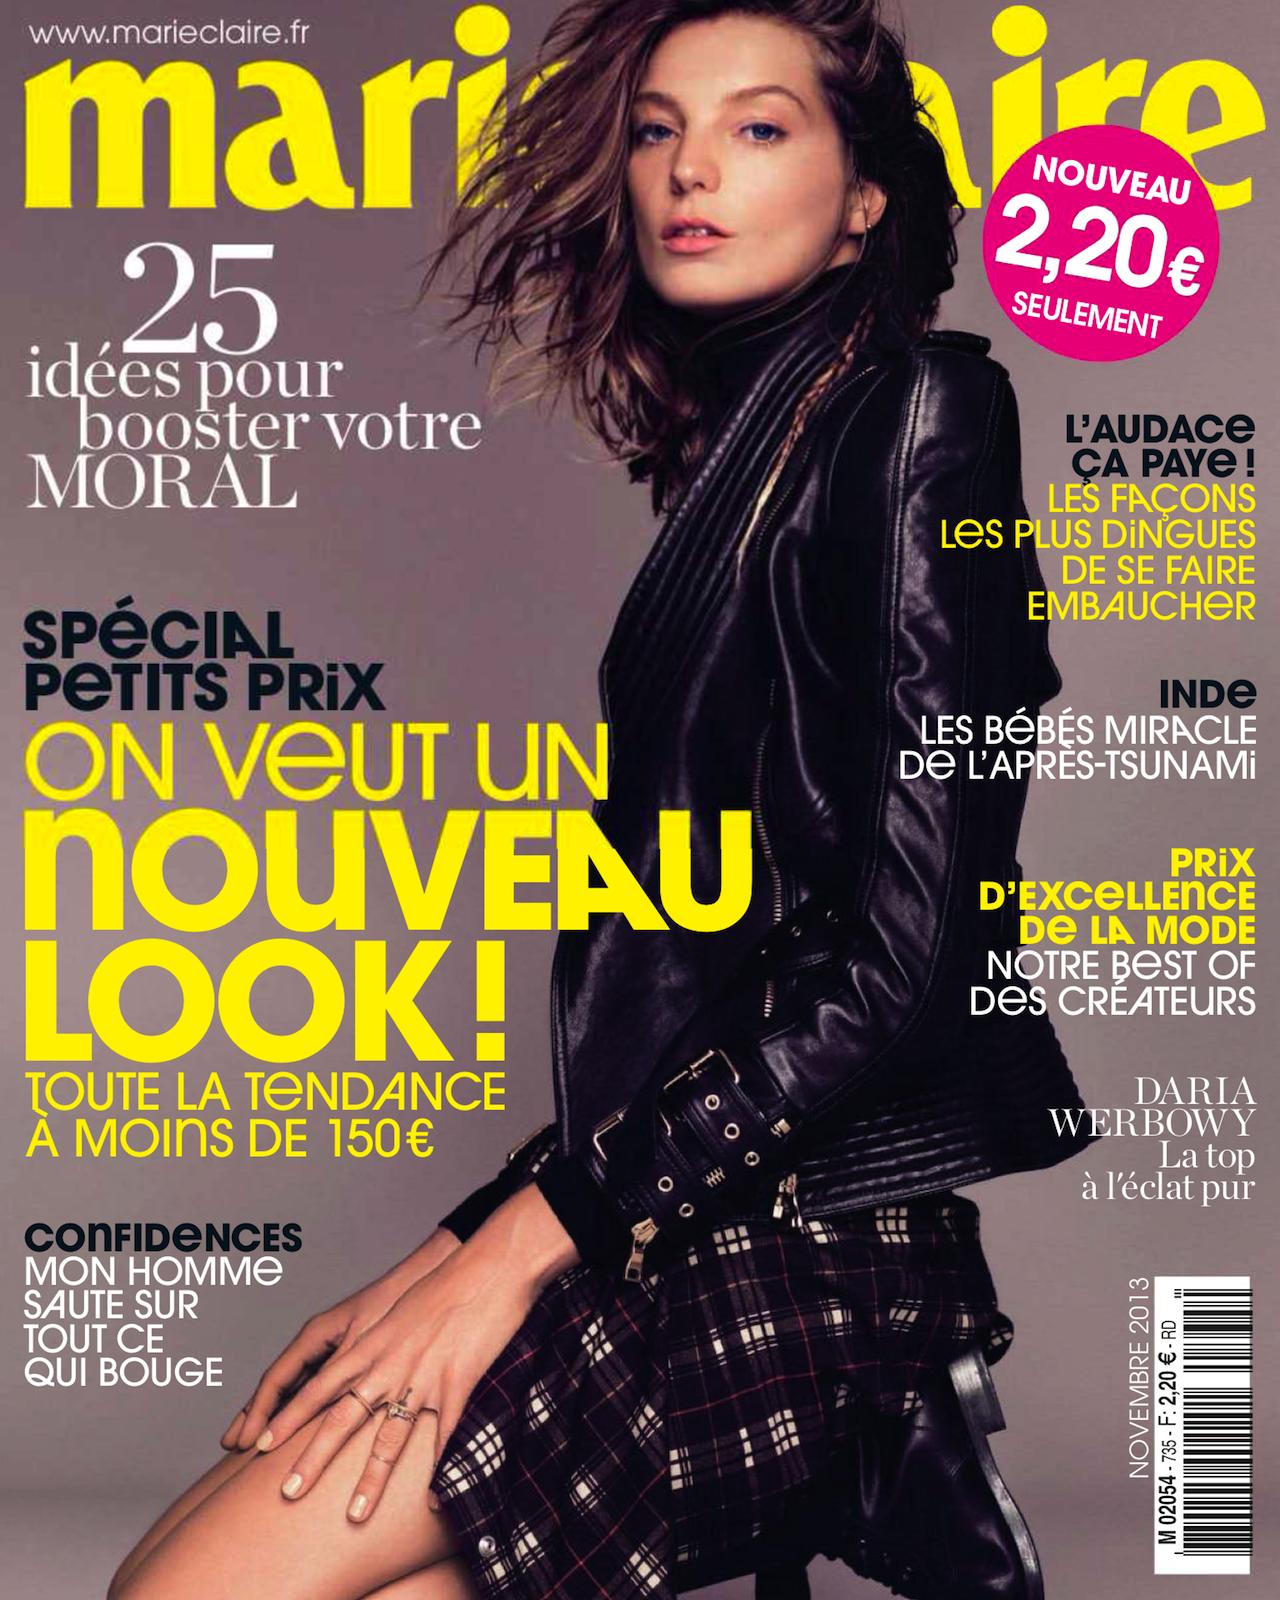 daria werbowy by nico for marie claire france november 2013 | visual ...